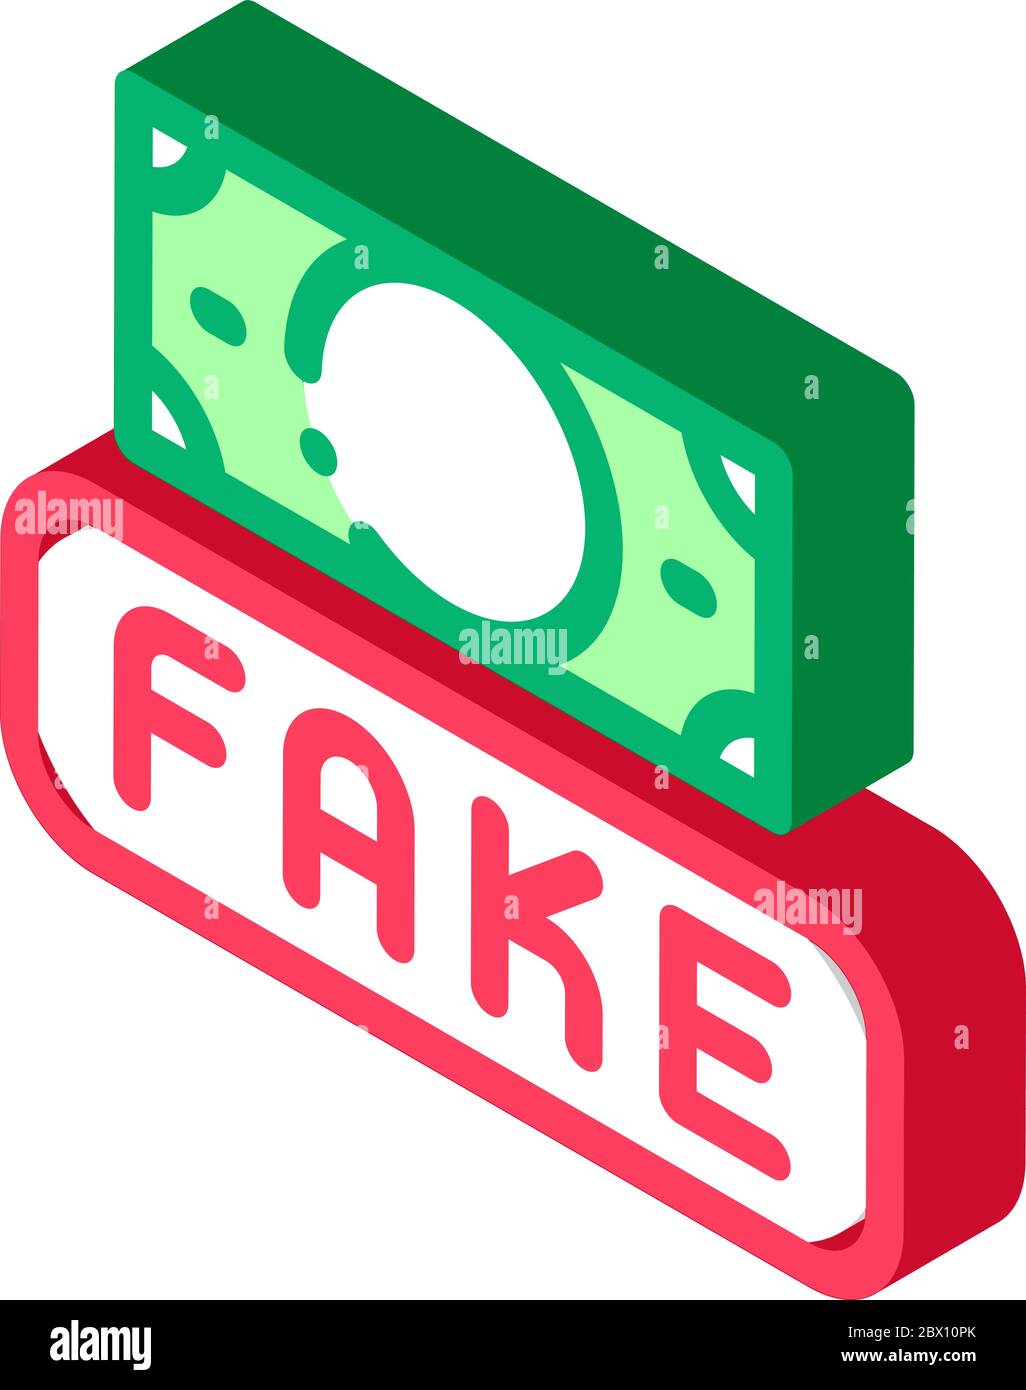 Fake Money Currency isometric icon vector illustration Stock Vector